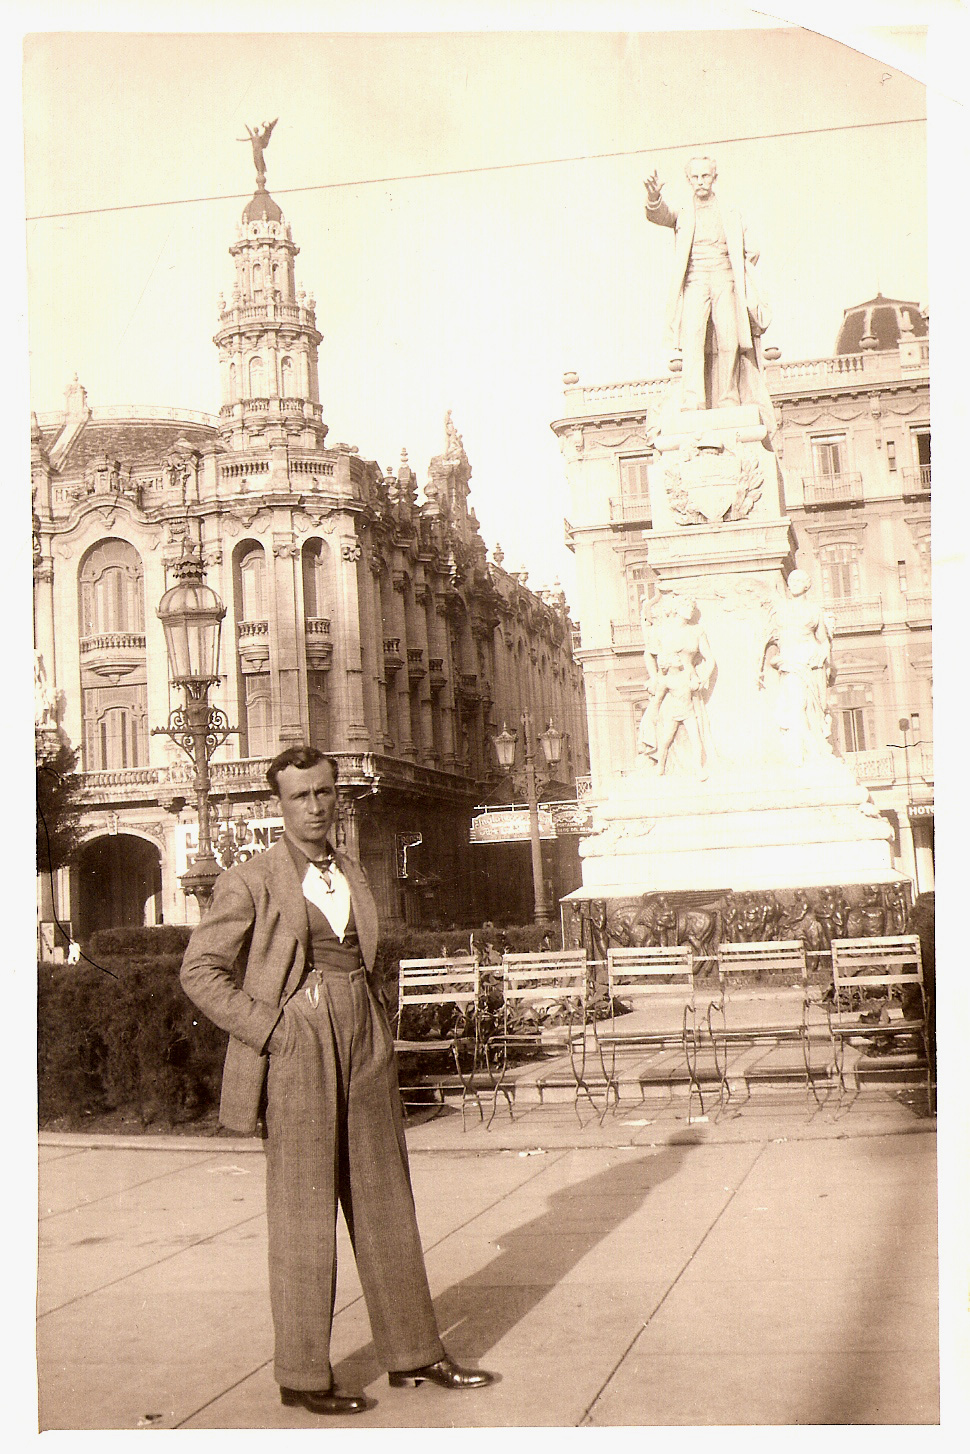 A photo of my grandfather, Giacomo Arena, taken sometime in the 1930's in old Havana's Parque Central, in front of the Marti statue outside the Hotel Inglaterra. The building to the left is El Gran Teatro de la Habana. View full size.